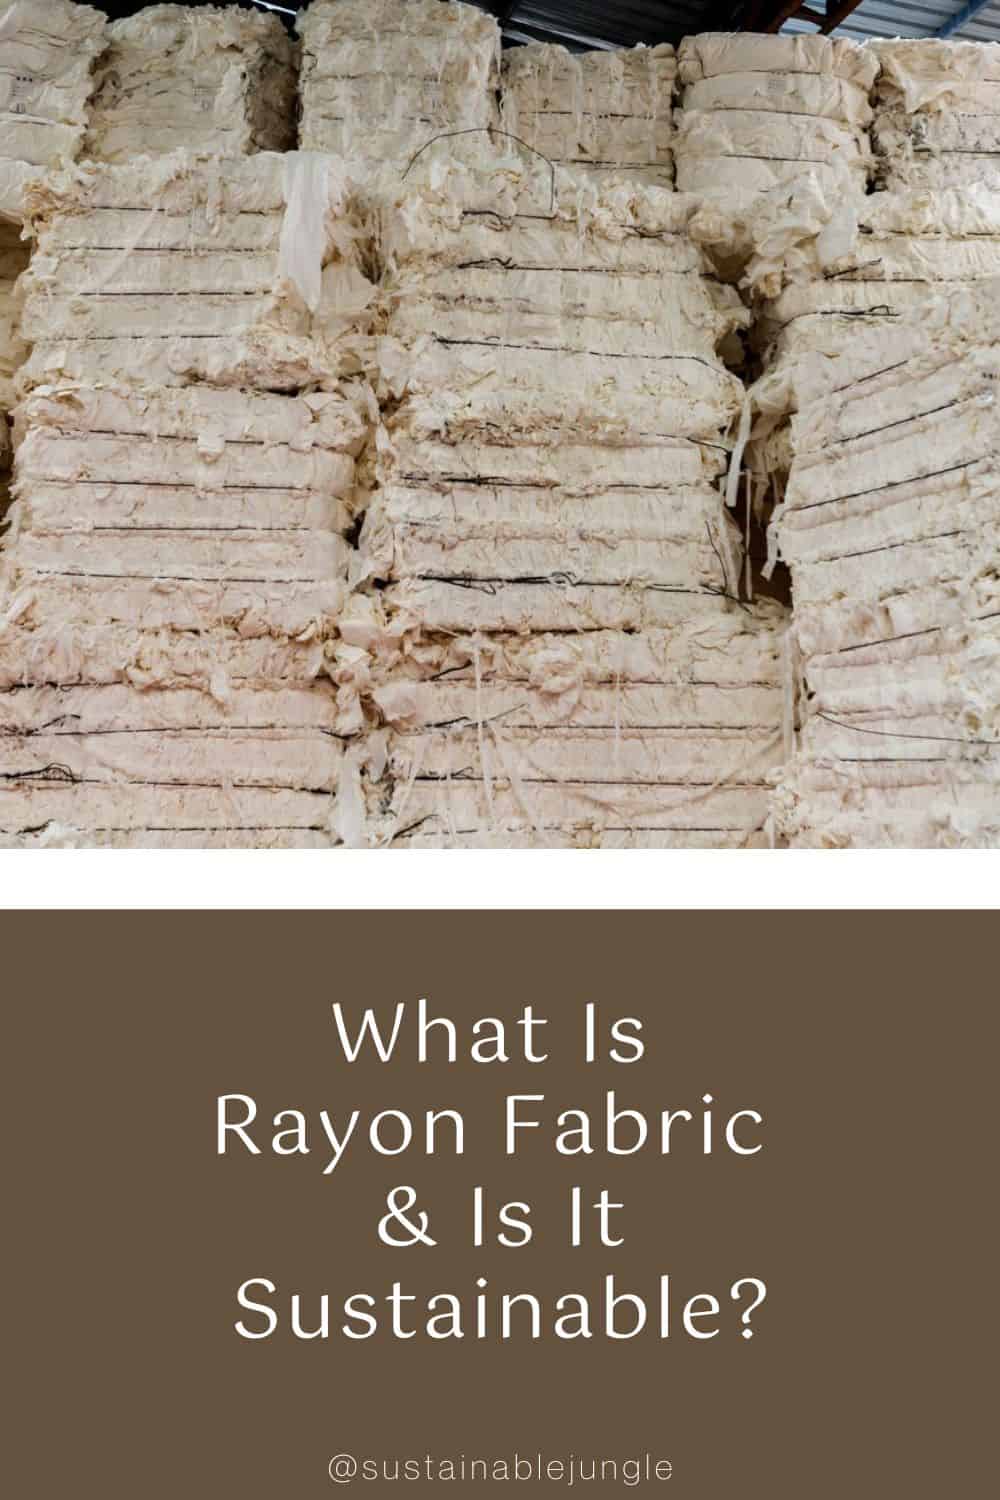 What is Rayon Fabric 2023 Image by hxdyl via Getty Images on Canva Pro #rayonfabric #whatisrayonfabric #israyonsustainable #howsustainableisrayon #lyocellrayonfabric #prosandconsofrayonfabric #sustainablejungle